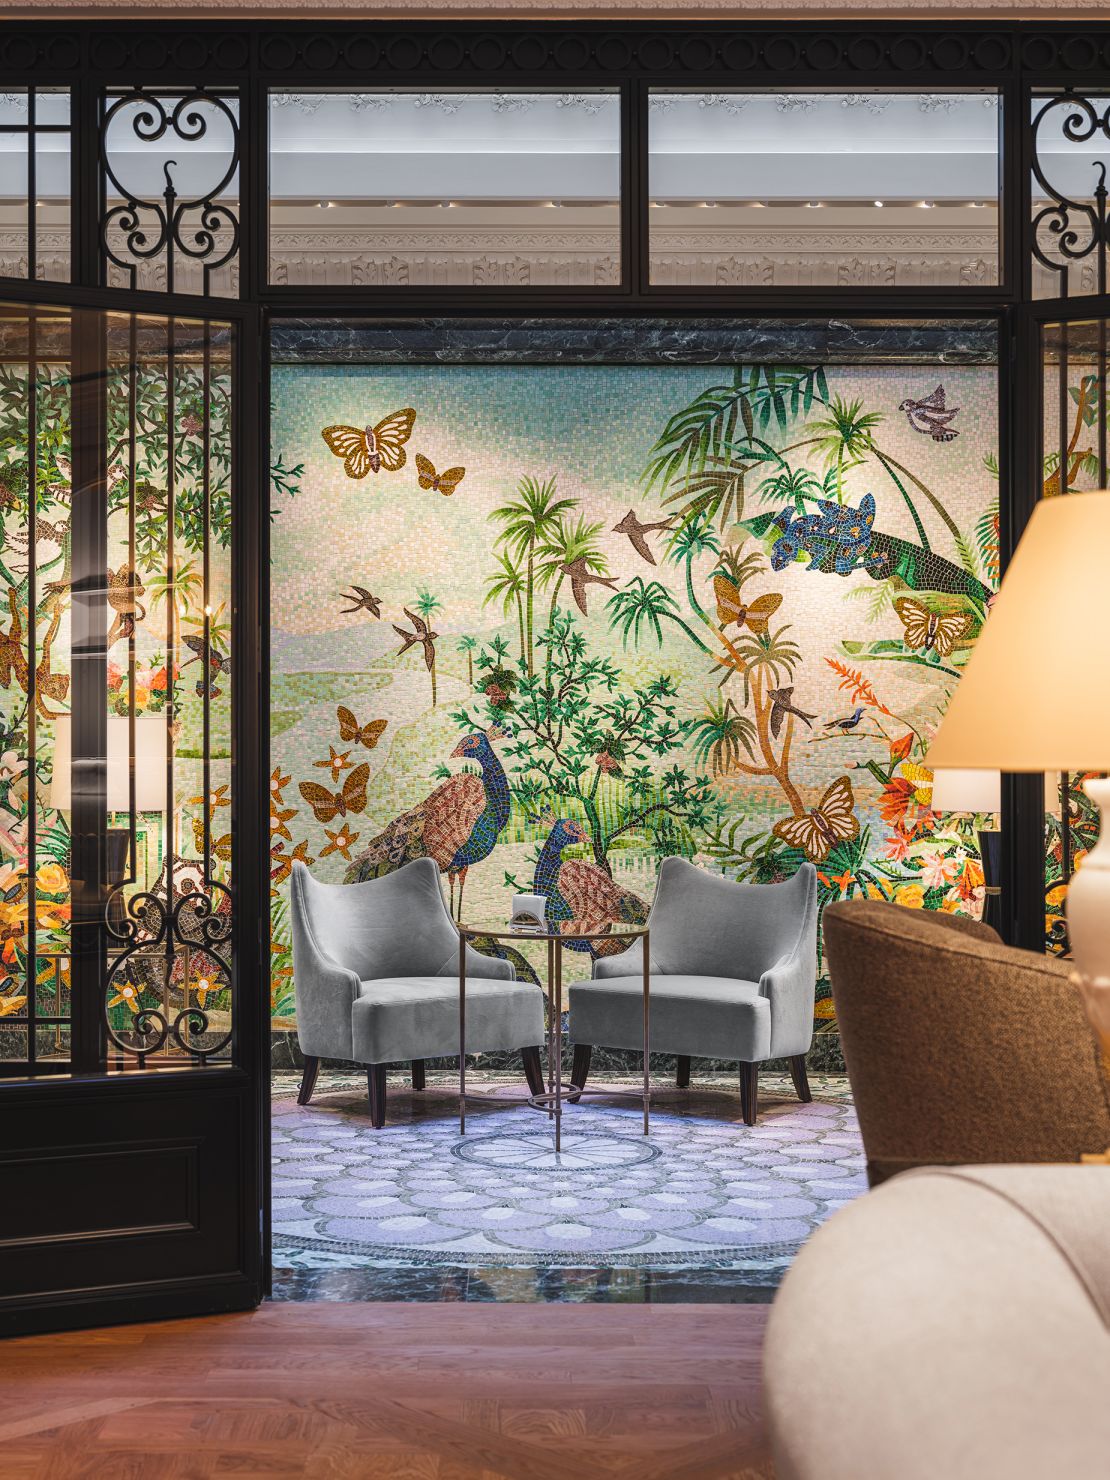 The property's “Winter Garden,” features a glass-roofed sitting room bathed in natural light featuring a mosaic created with cabochon gemstones.